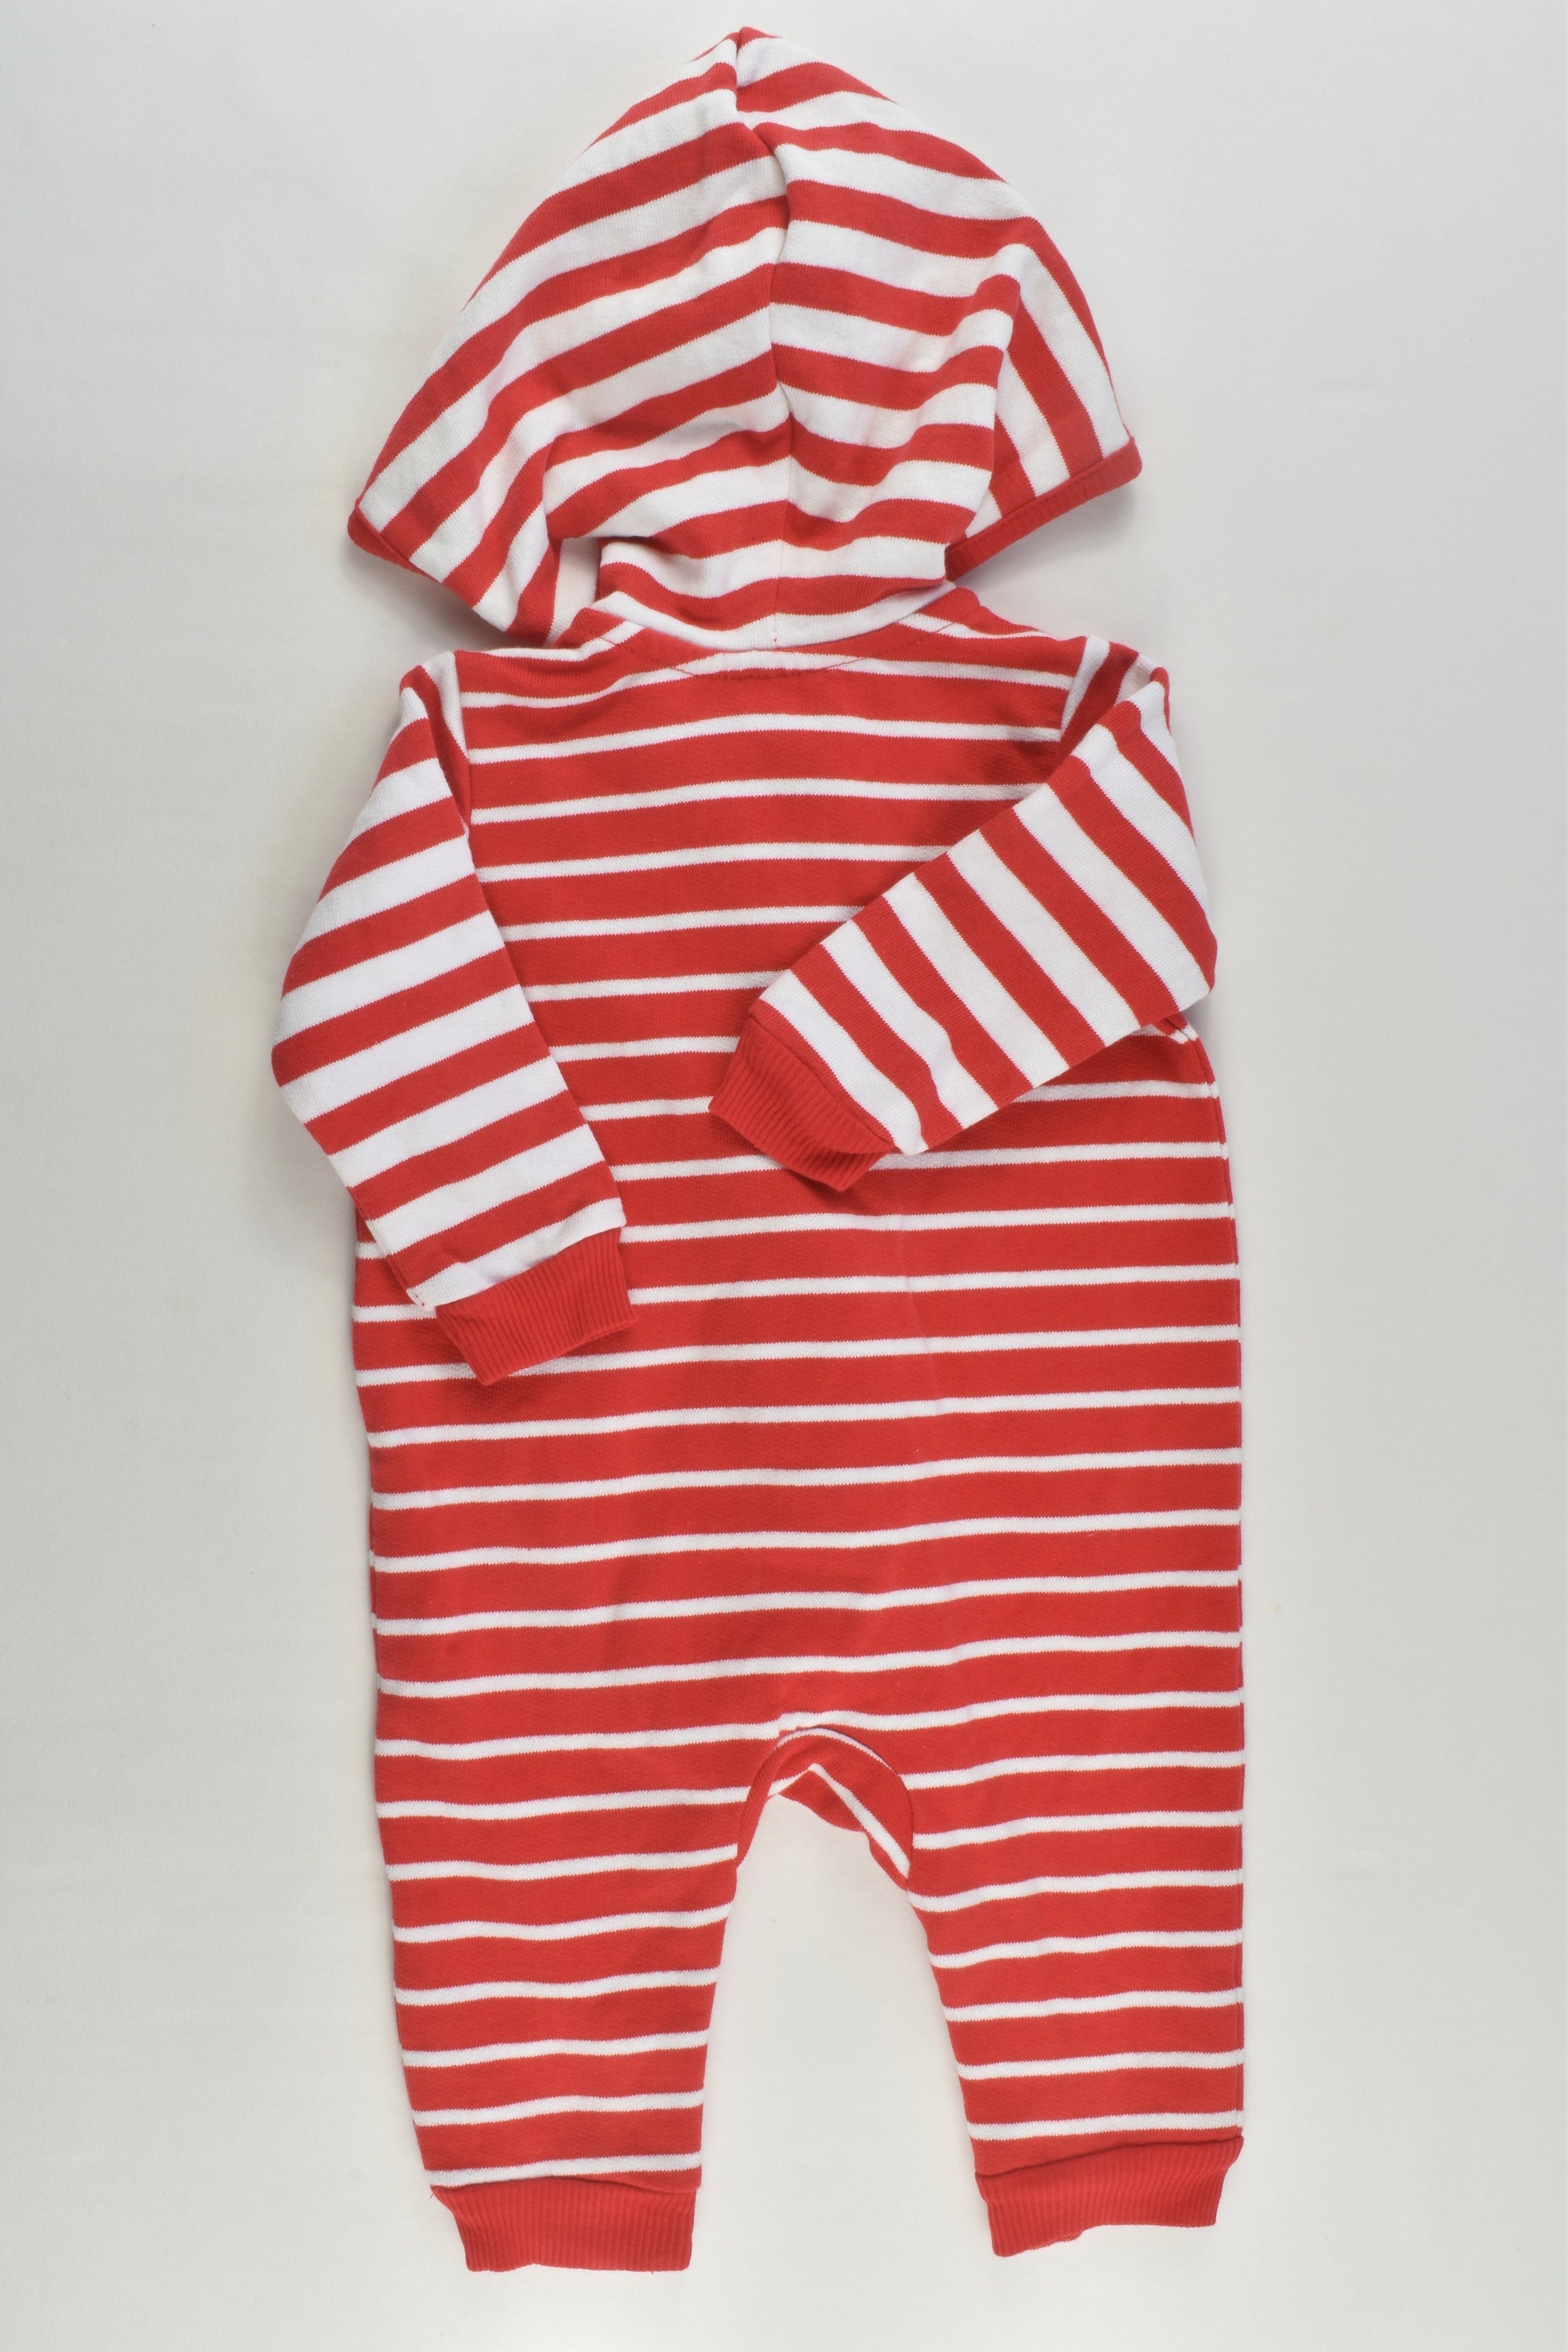 NEW Target Size 000 Striped One Piece